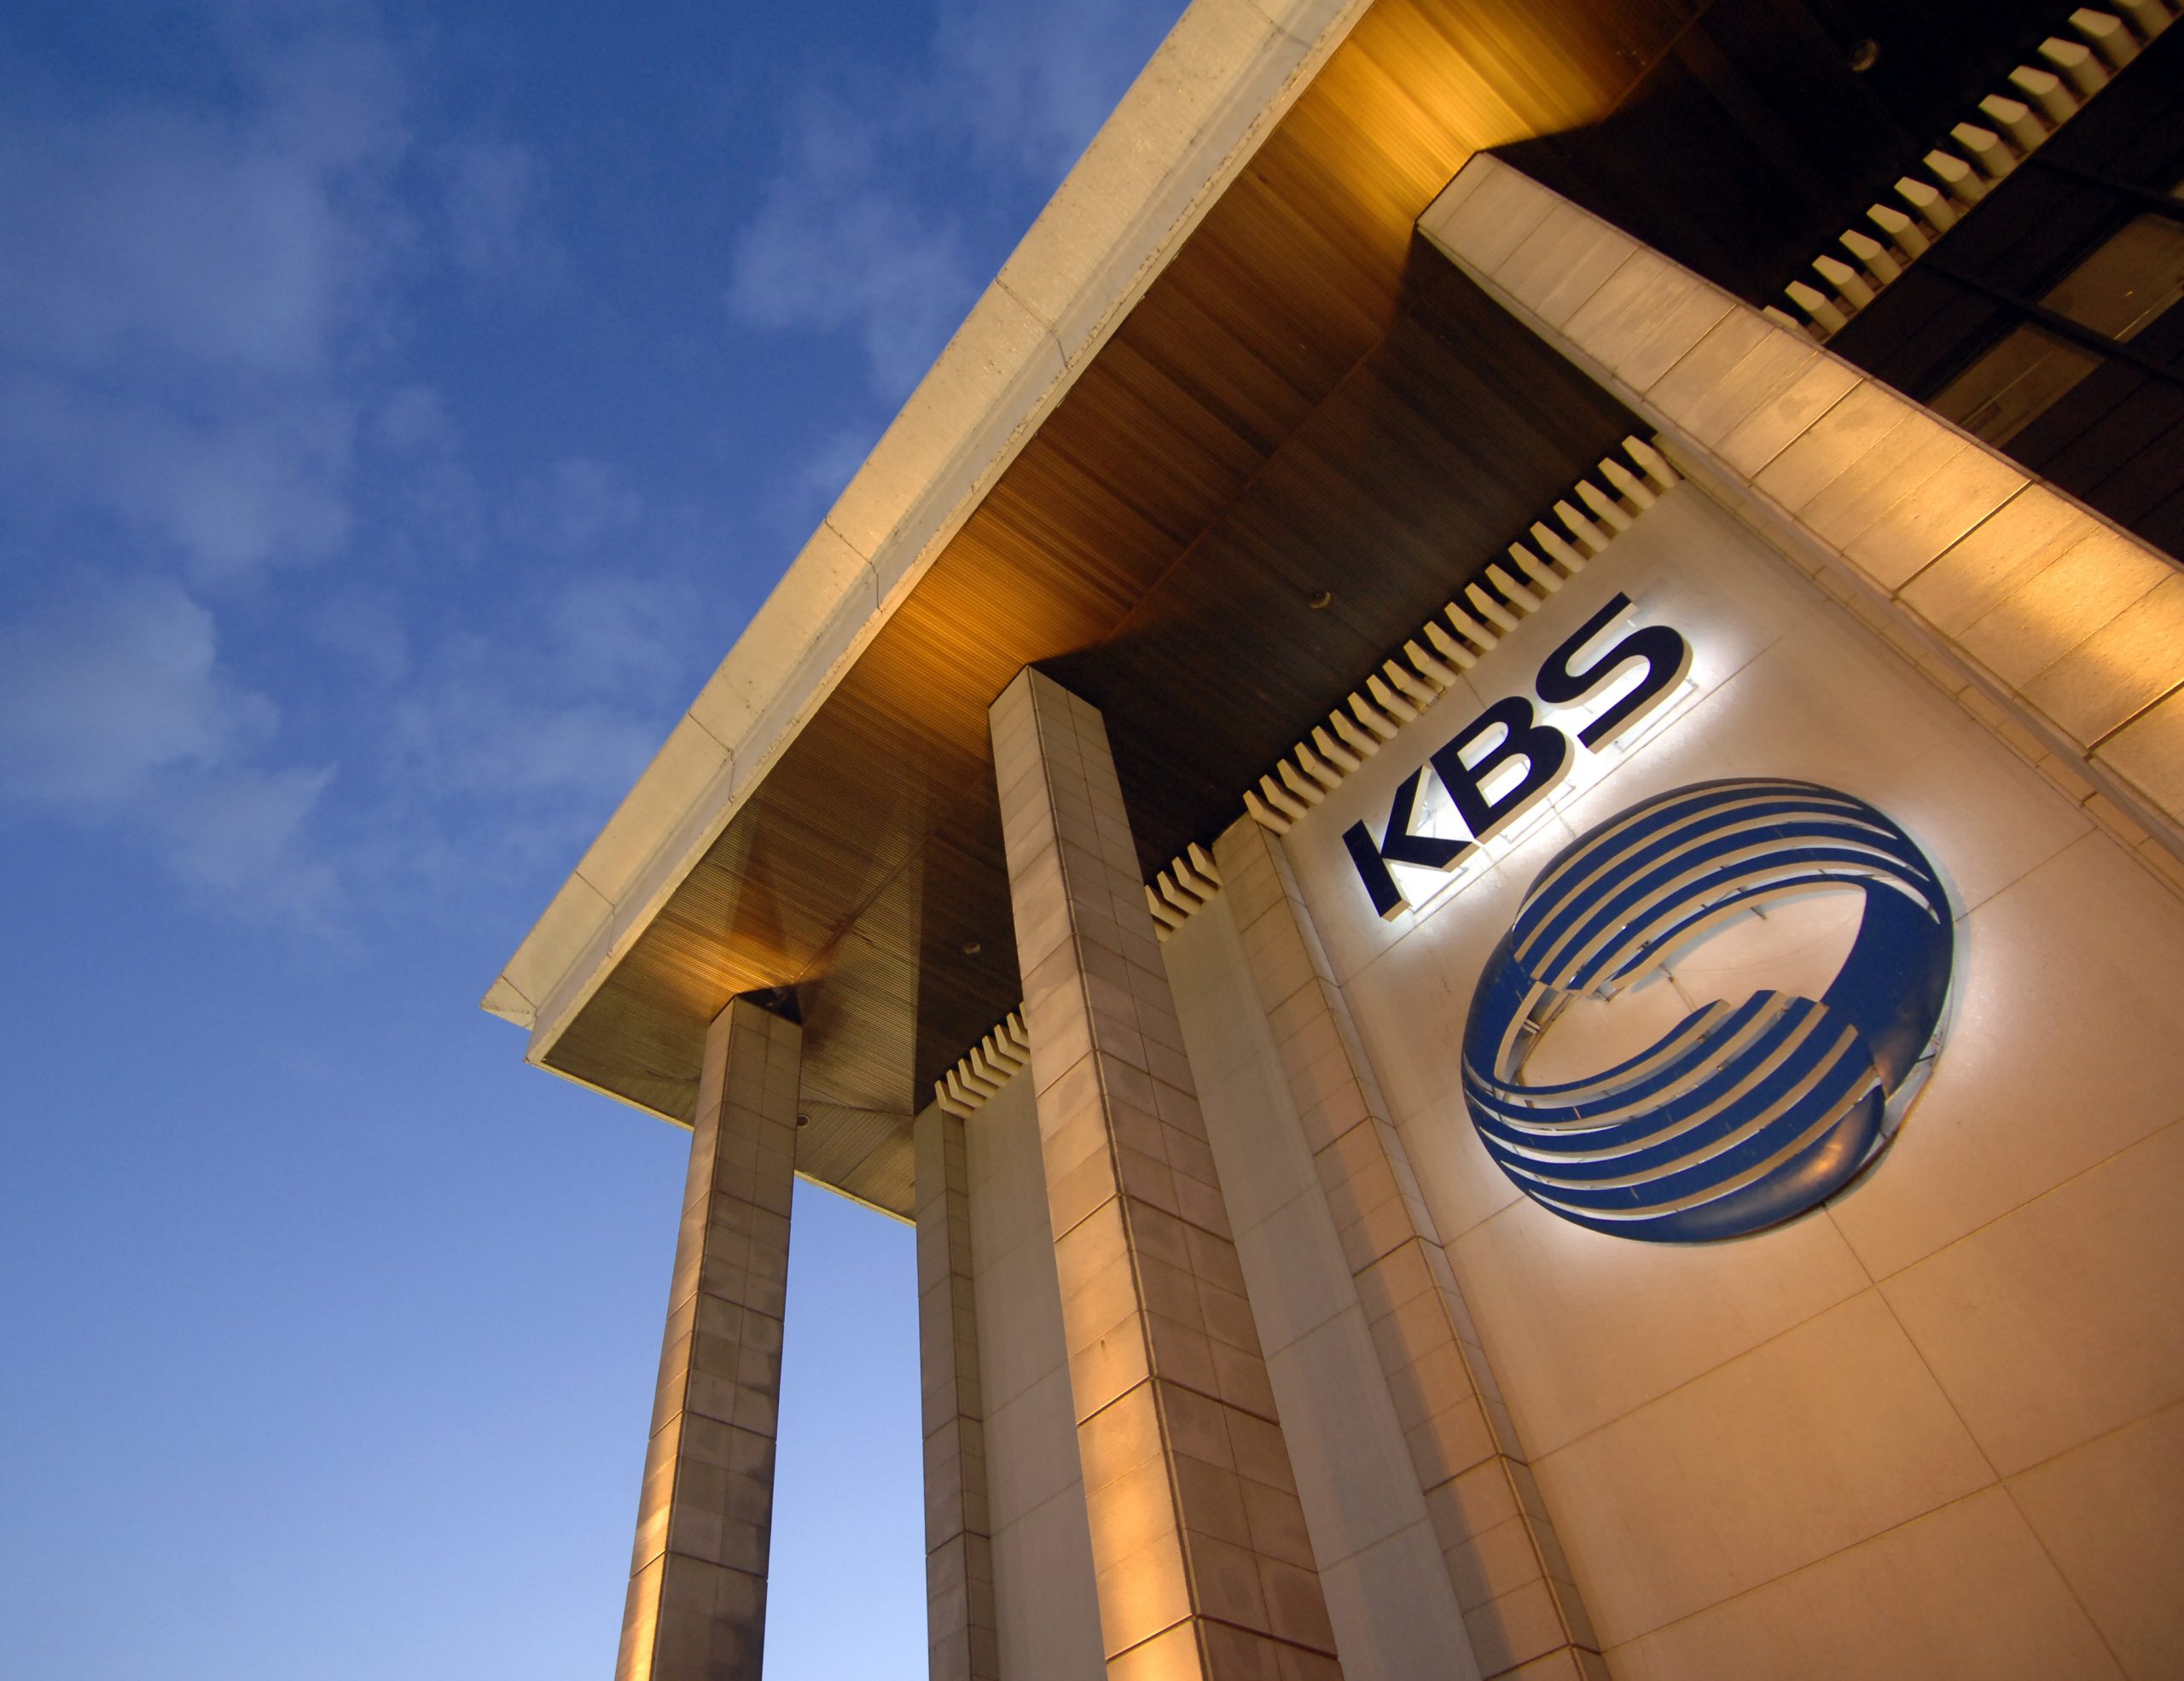 The KBS logo on the side of its HQ building.